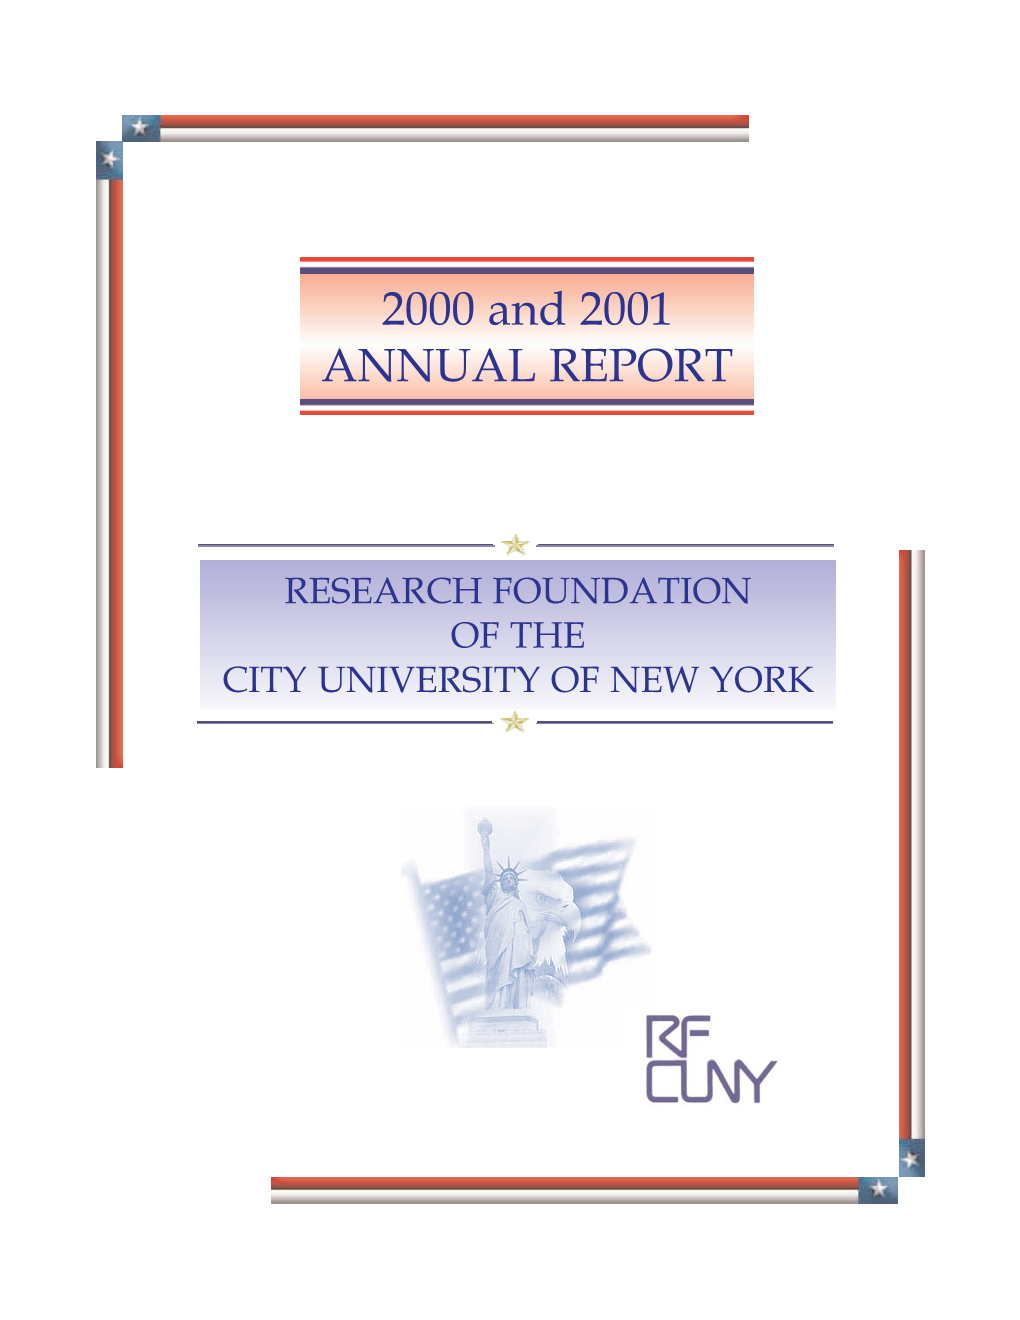 2000 and 2001 ANNUAL REPORT